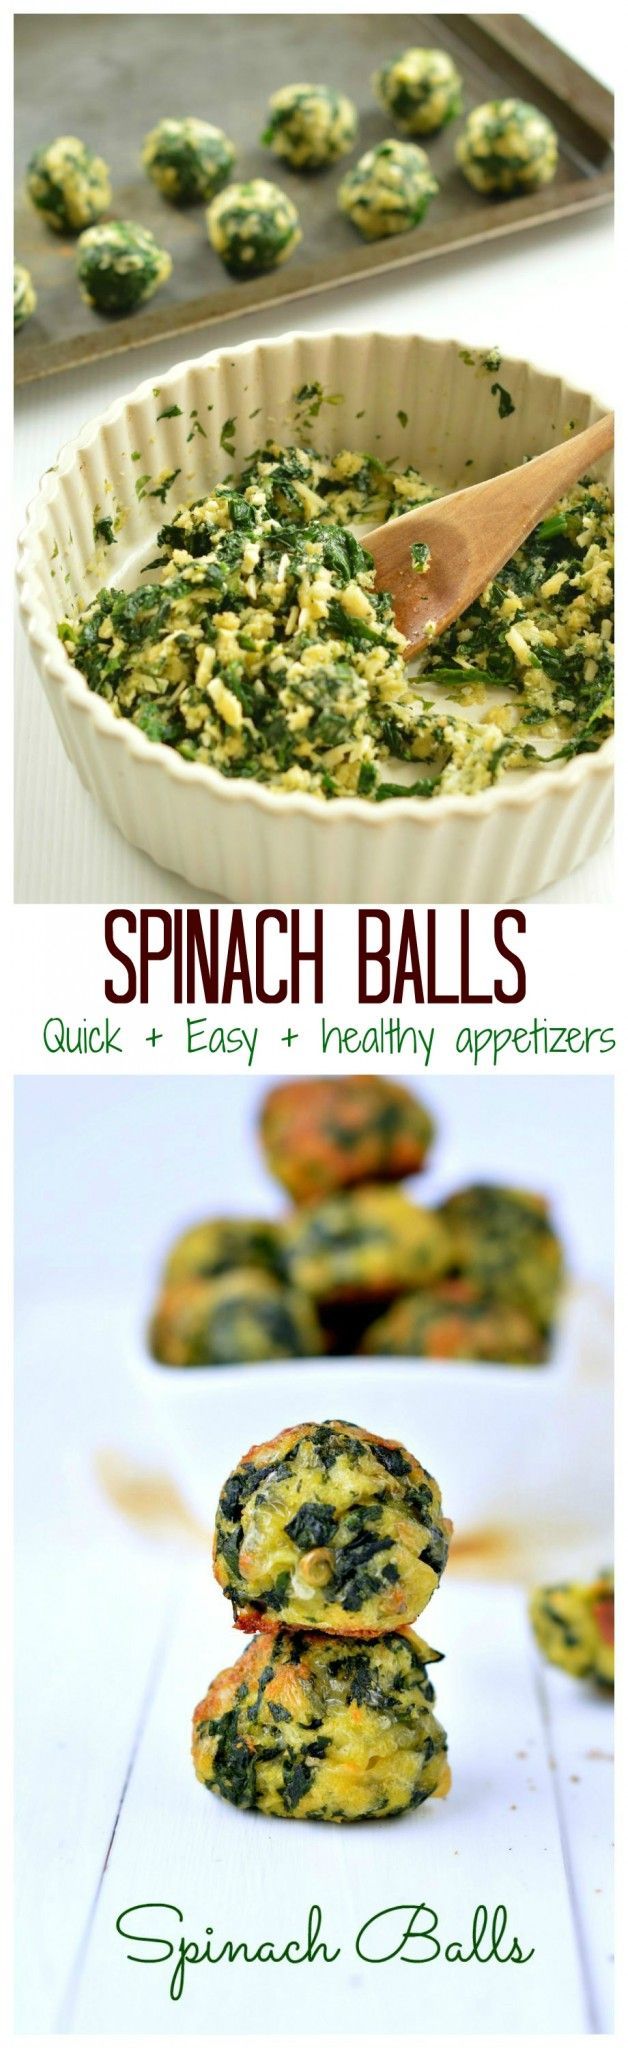 My fav Healthy Party Appetizers! Those Spinach balls are made with only 5 ingredients and take few minutes to prepare and it